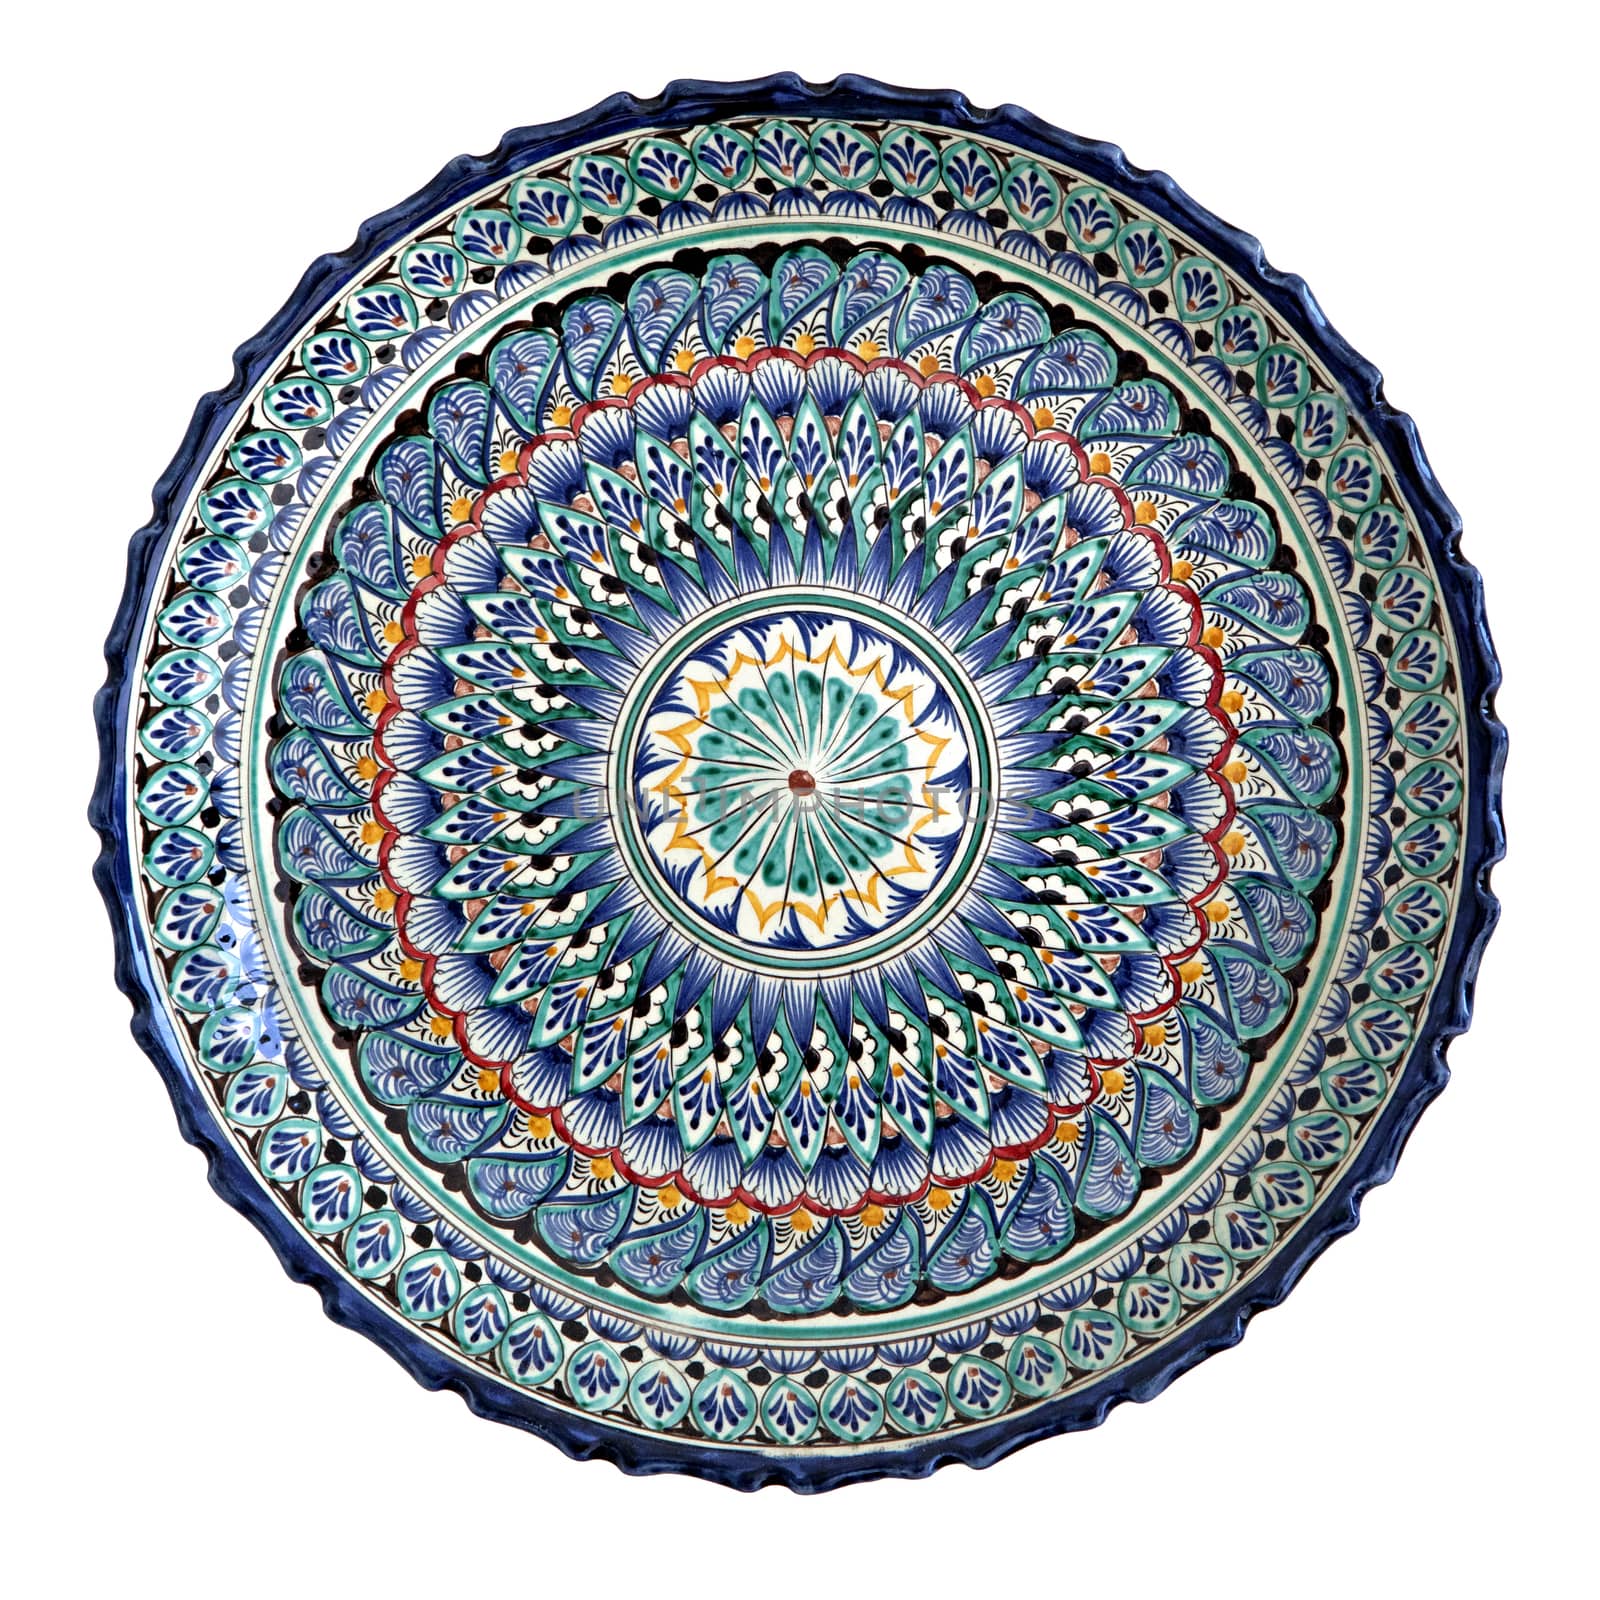 Plate with traditional uzbek ornament, isolated over white